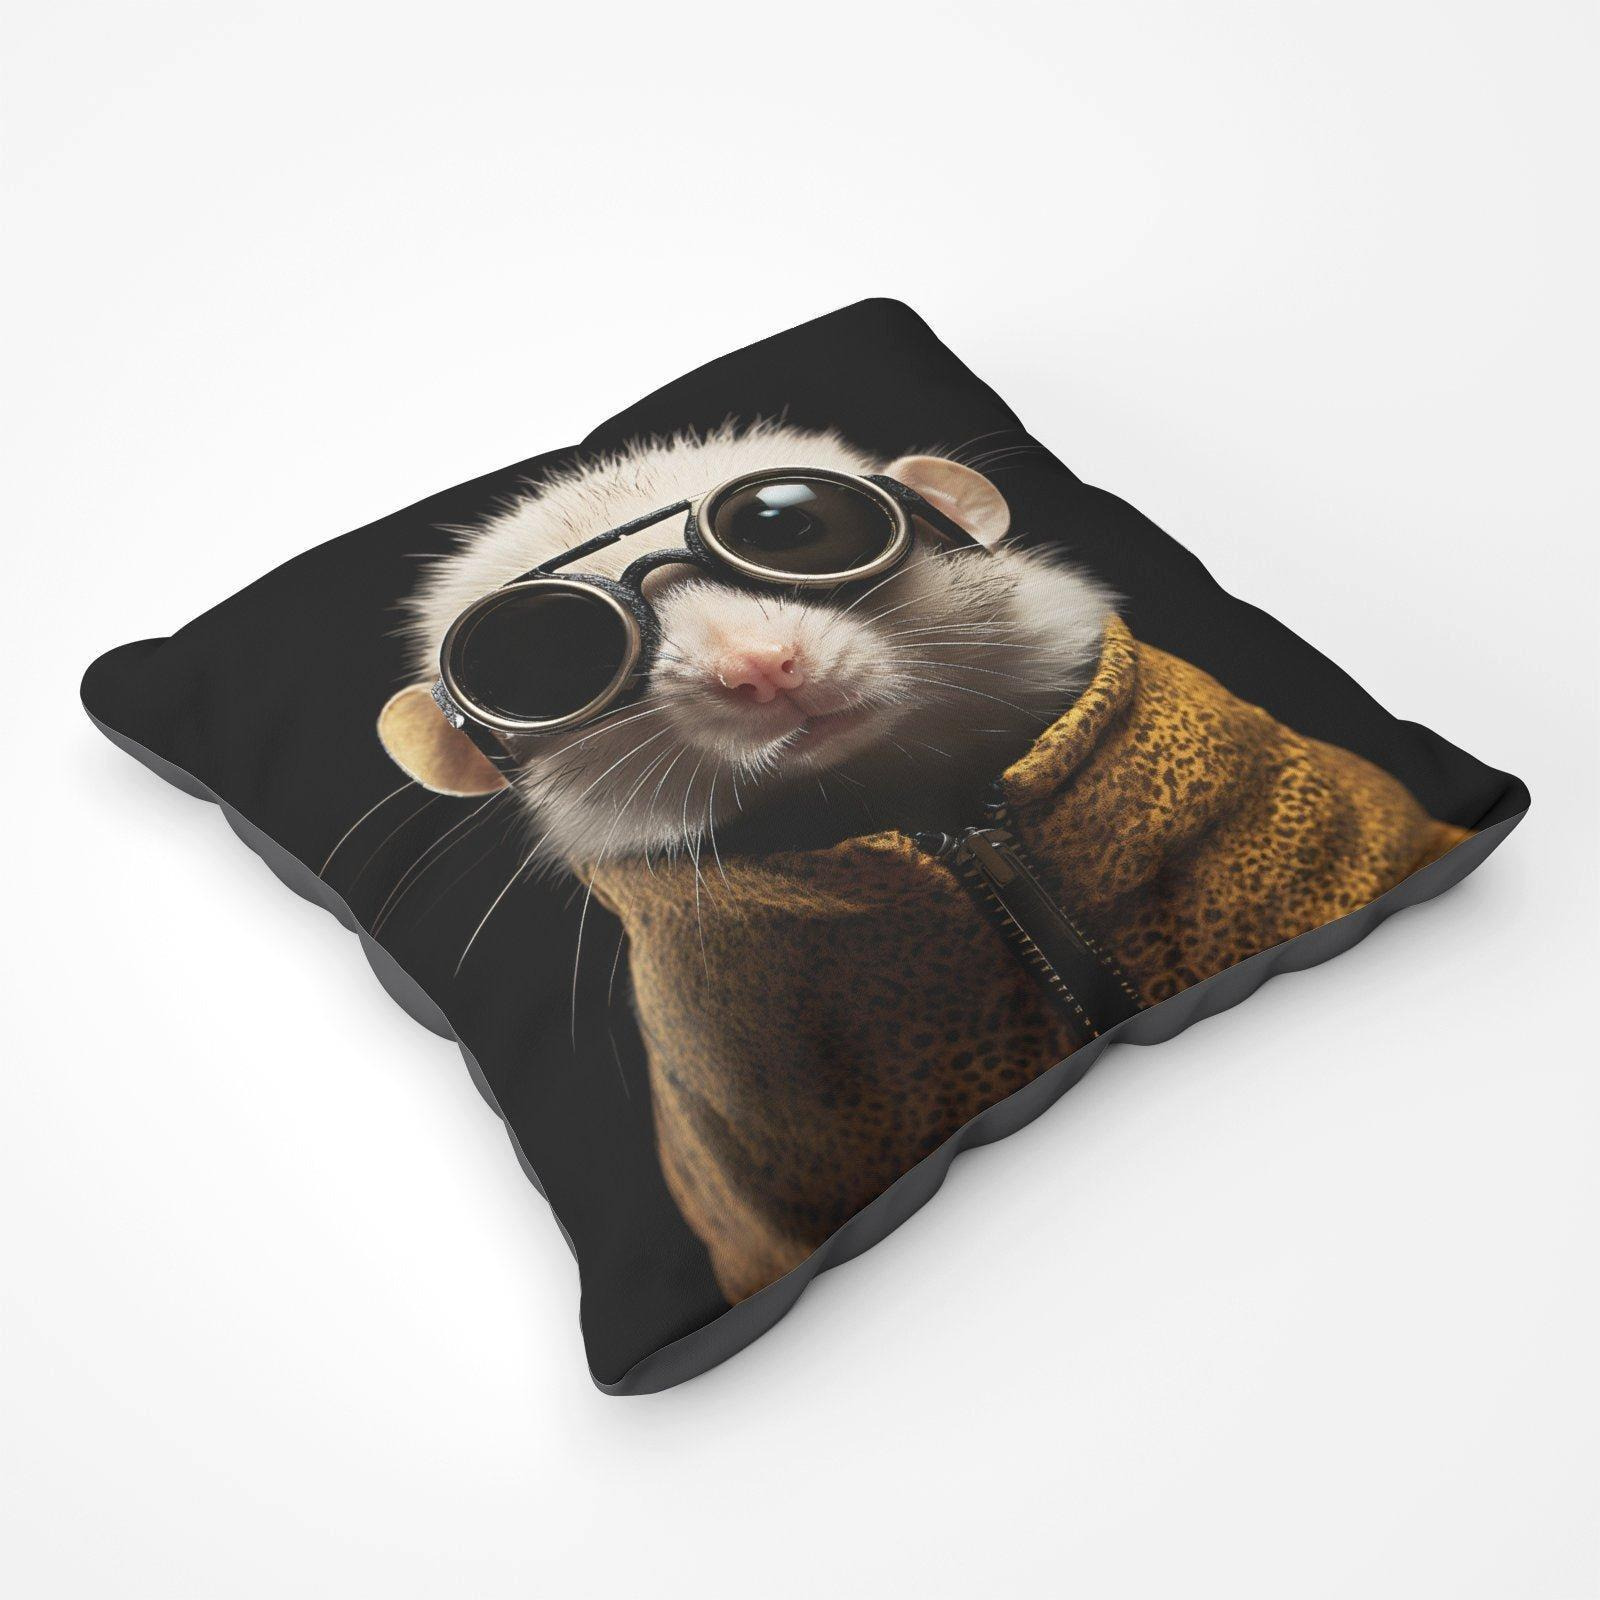 Realistic Doormouse With Glasses Floor Cushion - image 1